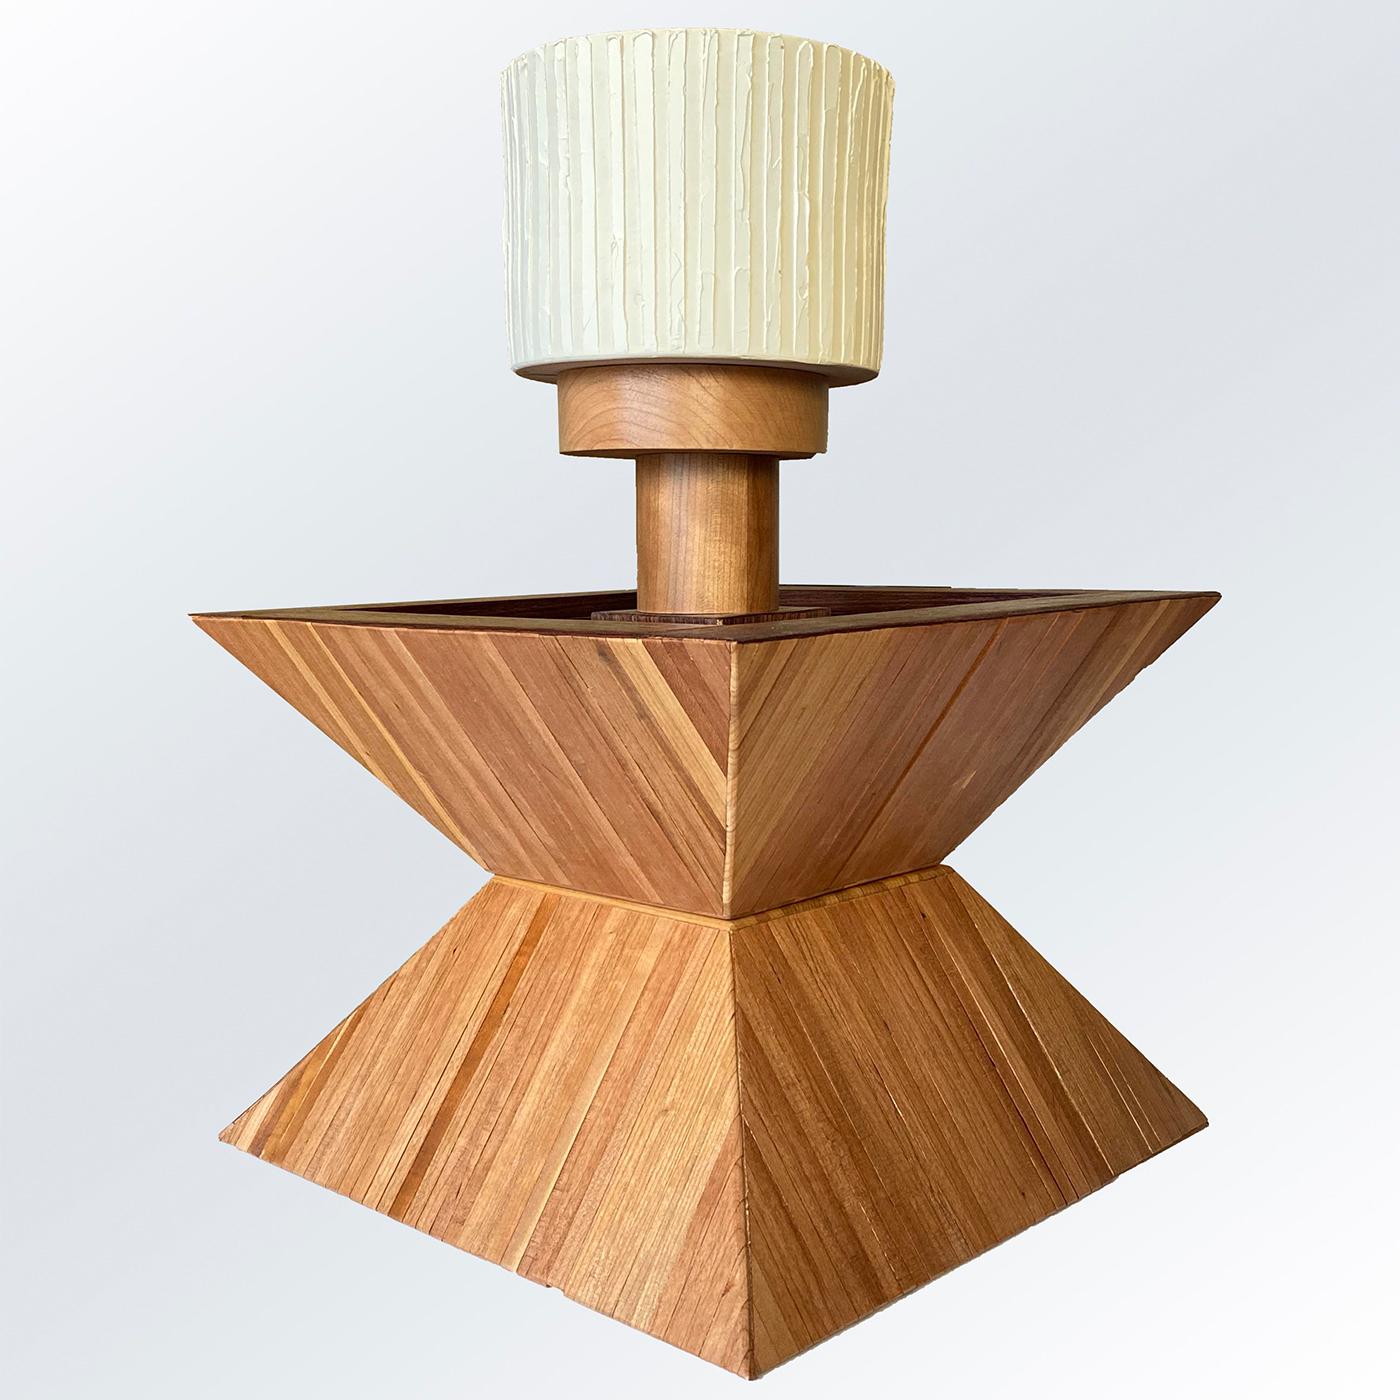 Featuring a sculptural cherry body consisting of two truncated pyramids sealed together and marked by thin grooves, this table lamp is a singular piece entirely handcrafted, numbered, and signed by the artist. The topping shade in off-white ceramic